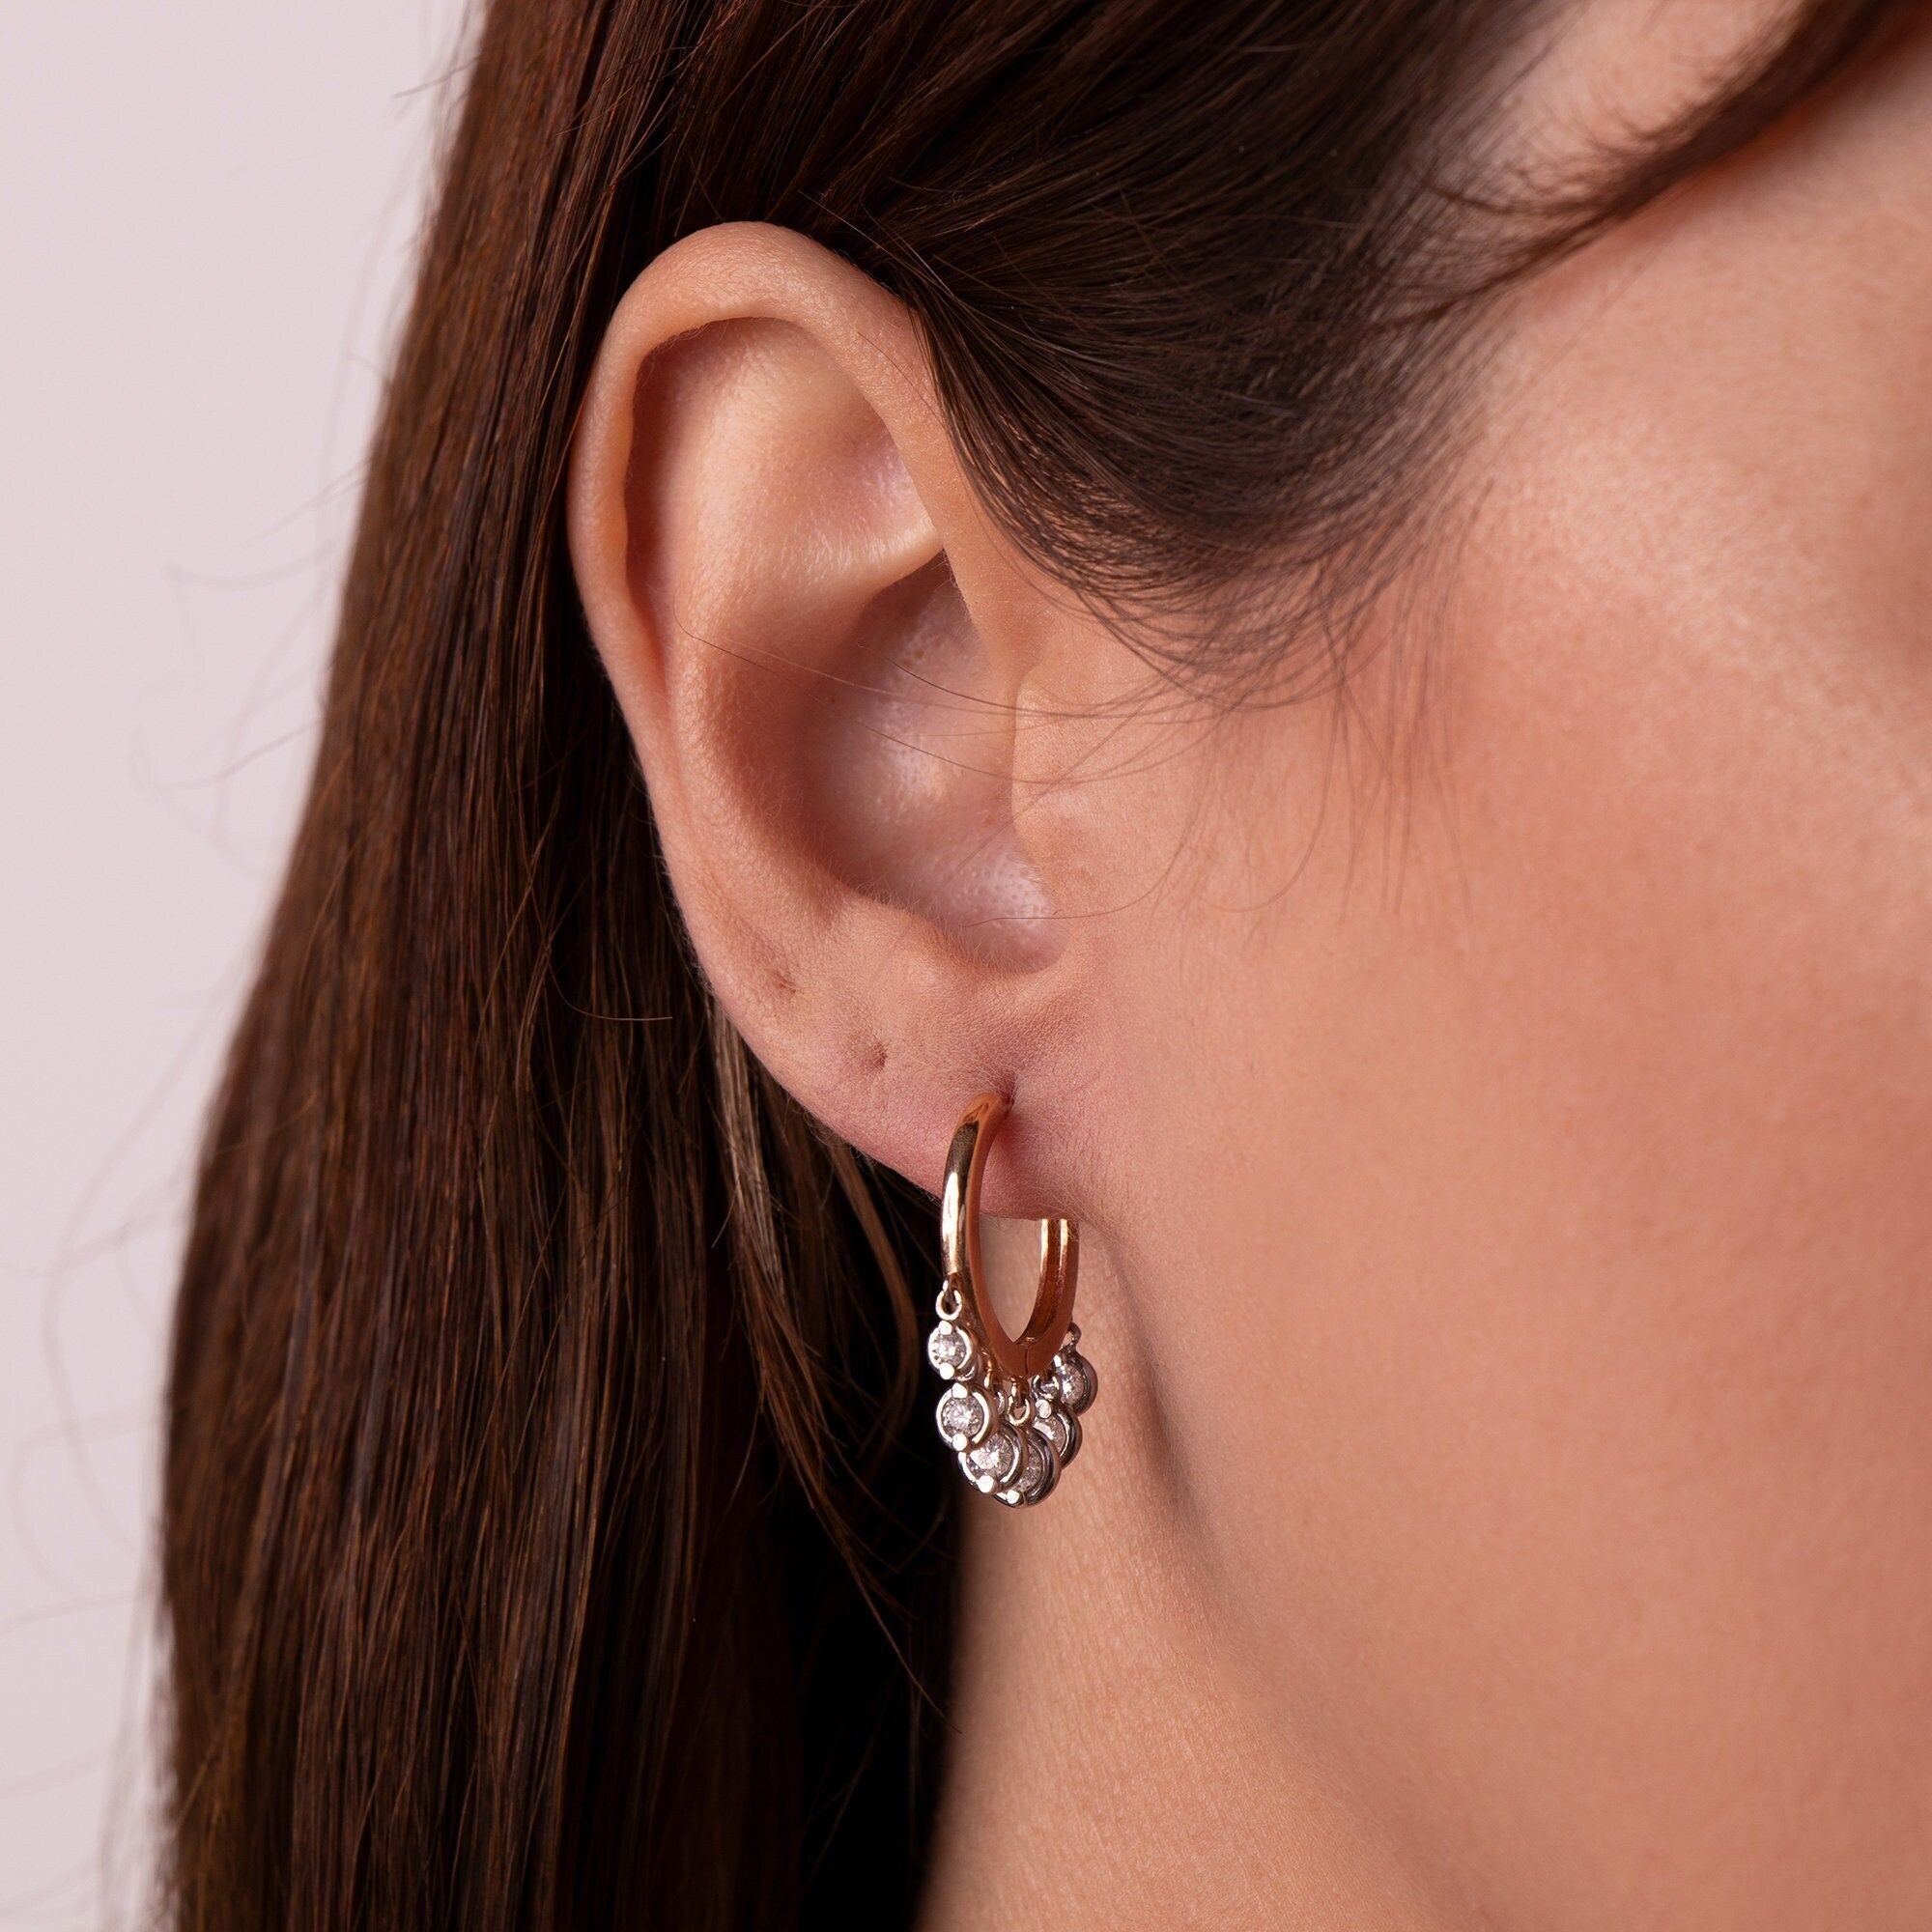 Diamond Hoop Earrings With Bezel Set Diamond Charms Available in 14K and 18K Gold